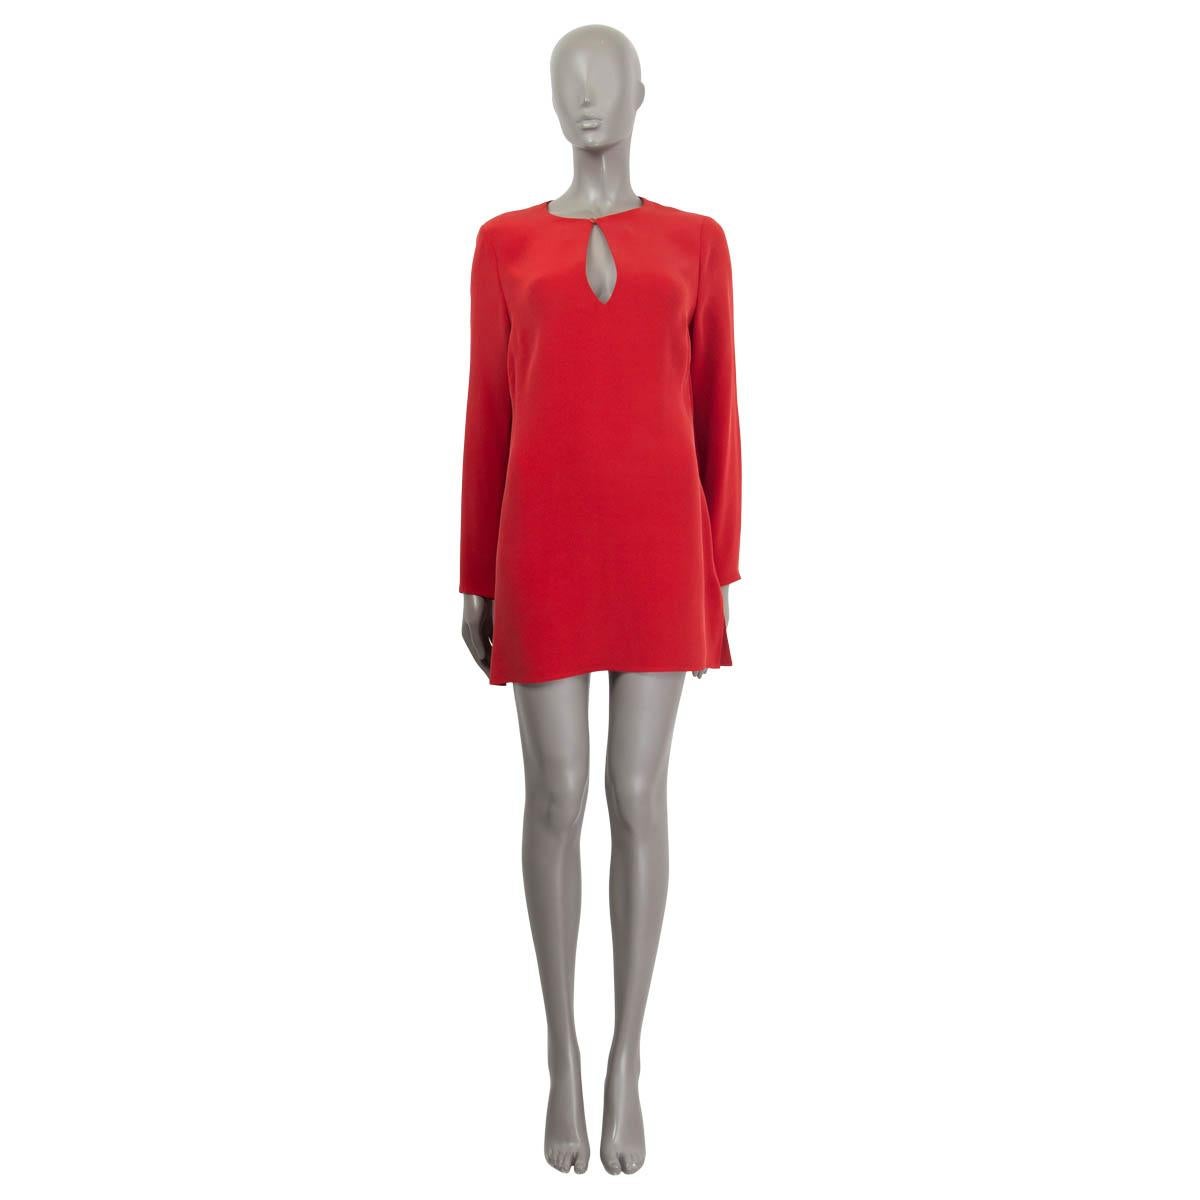 100% authentic Ralph Lauren keyhole dress in cherry red acetate (69%) and silk (31%). Features long sleeves. Opens with one button on the front. Unlined. Has been worn and is in excellent condition.

Measurements
Tag Size	10
Size	L
Shoulder